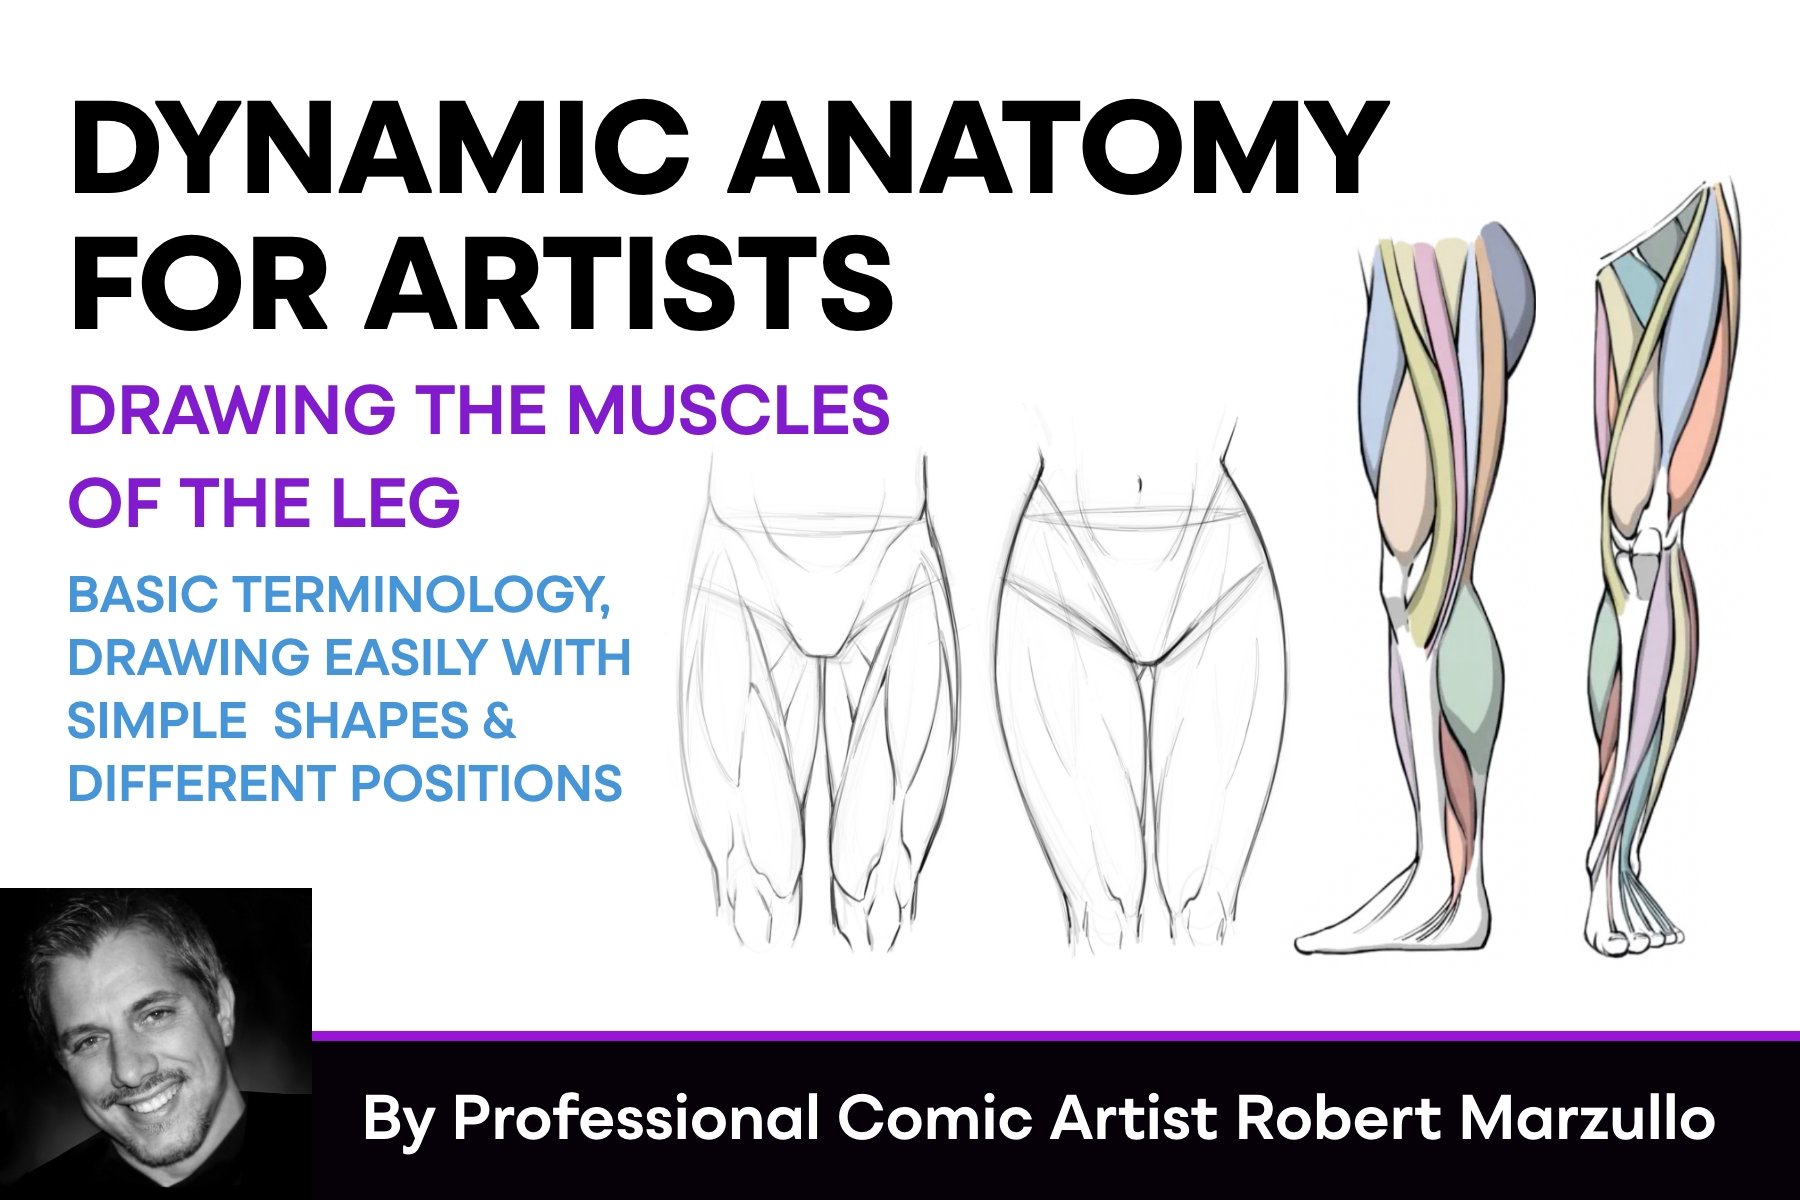 Dynamic Anatomy For Artists - Drawing The Muscles Of The Leg